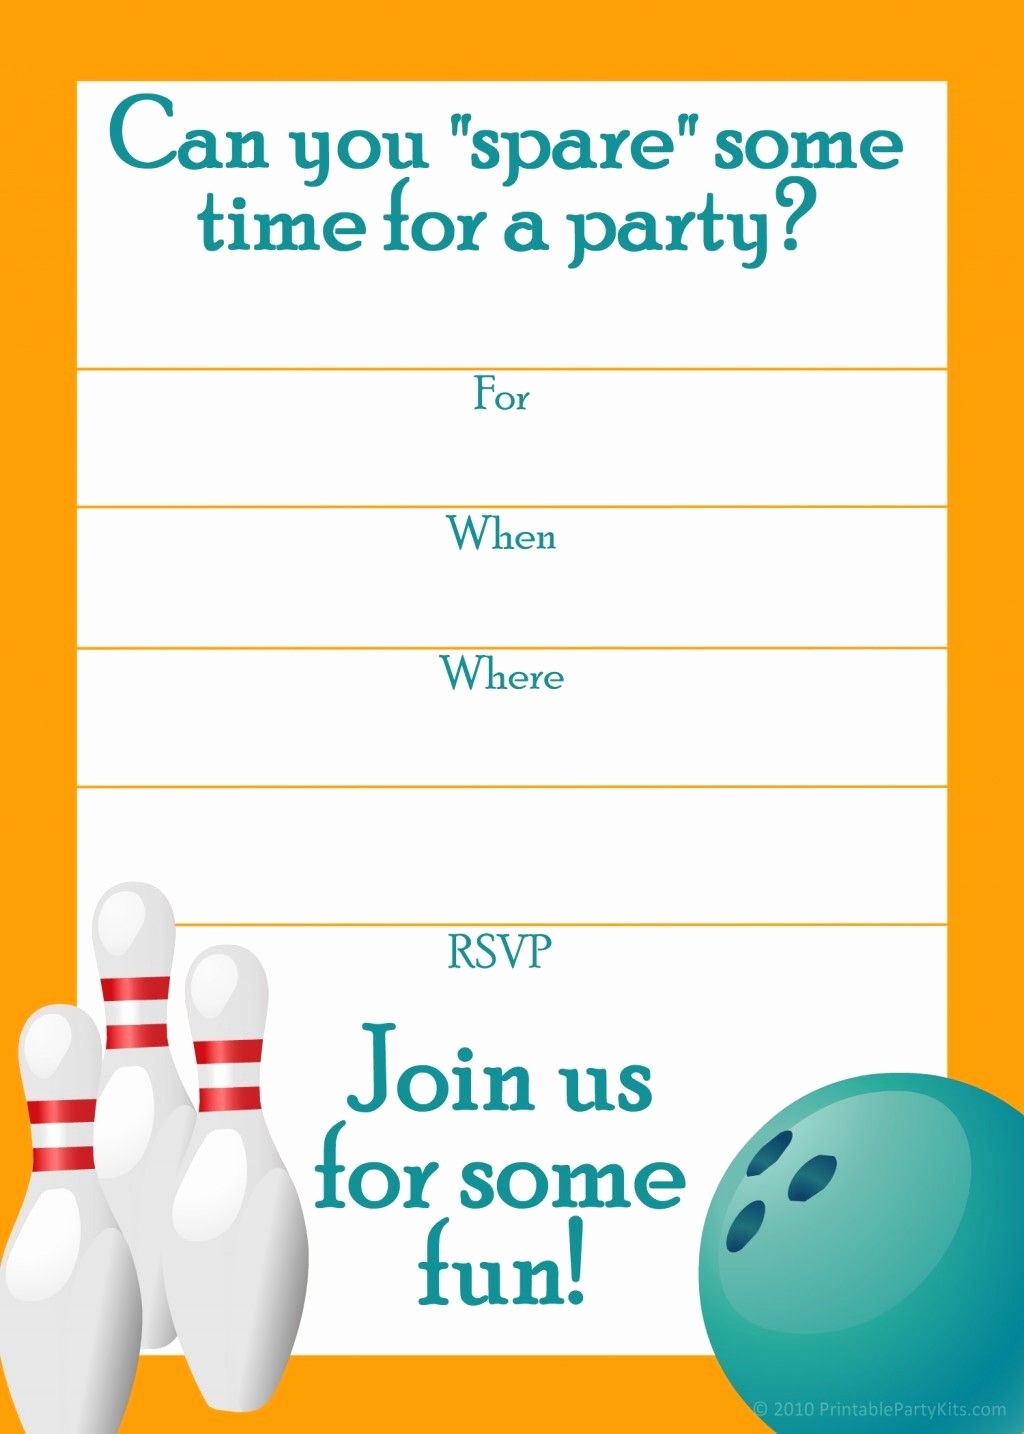 Free Printable Party Invitations Templates Awesome Free Printable Sports Birthday Party Invitations Templates